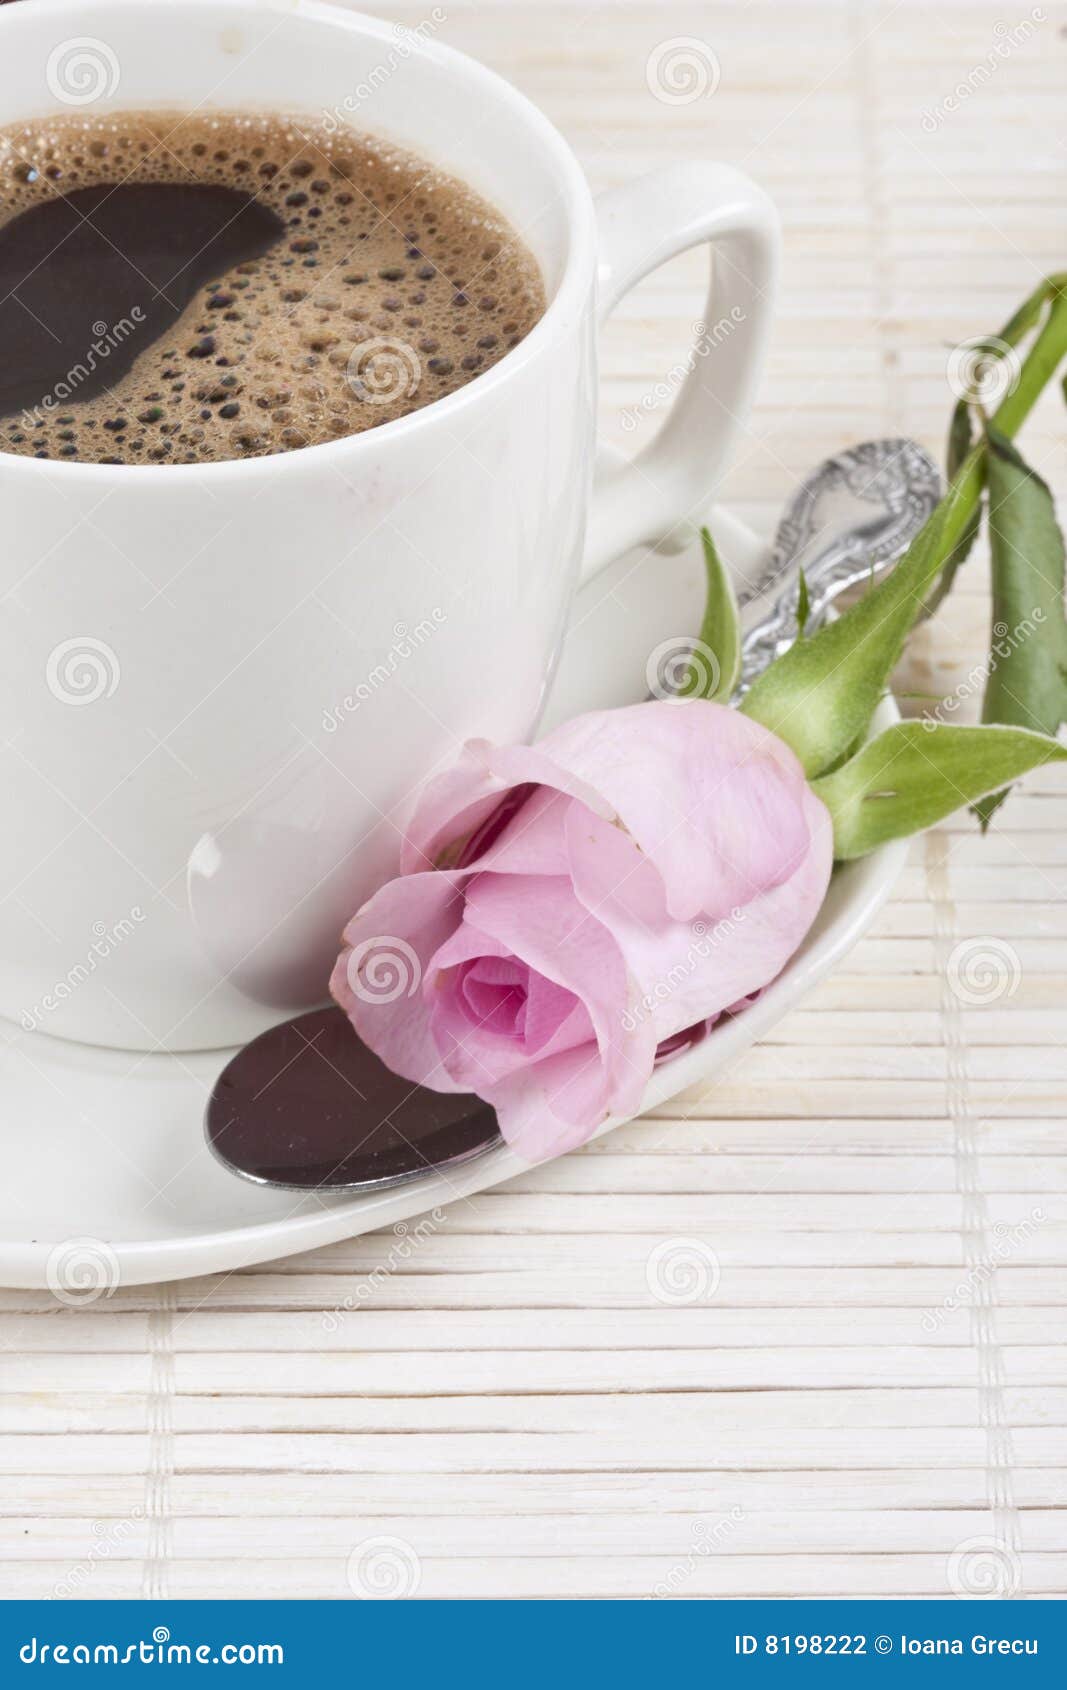 fresh brewed coffee and a rose